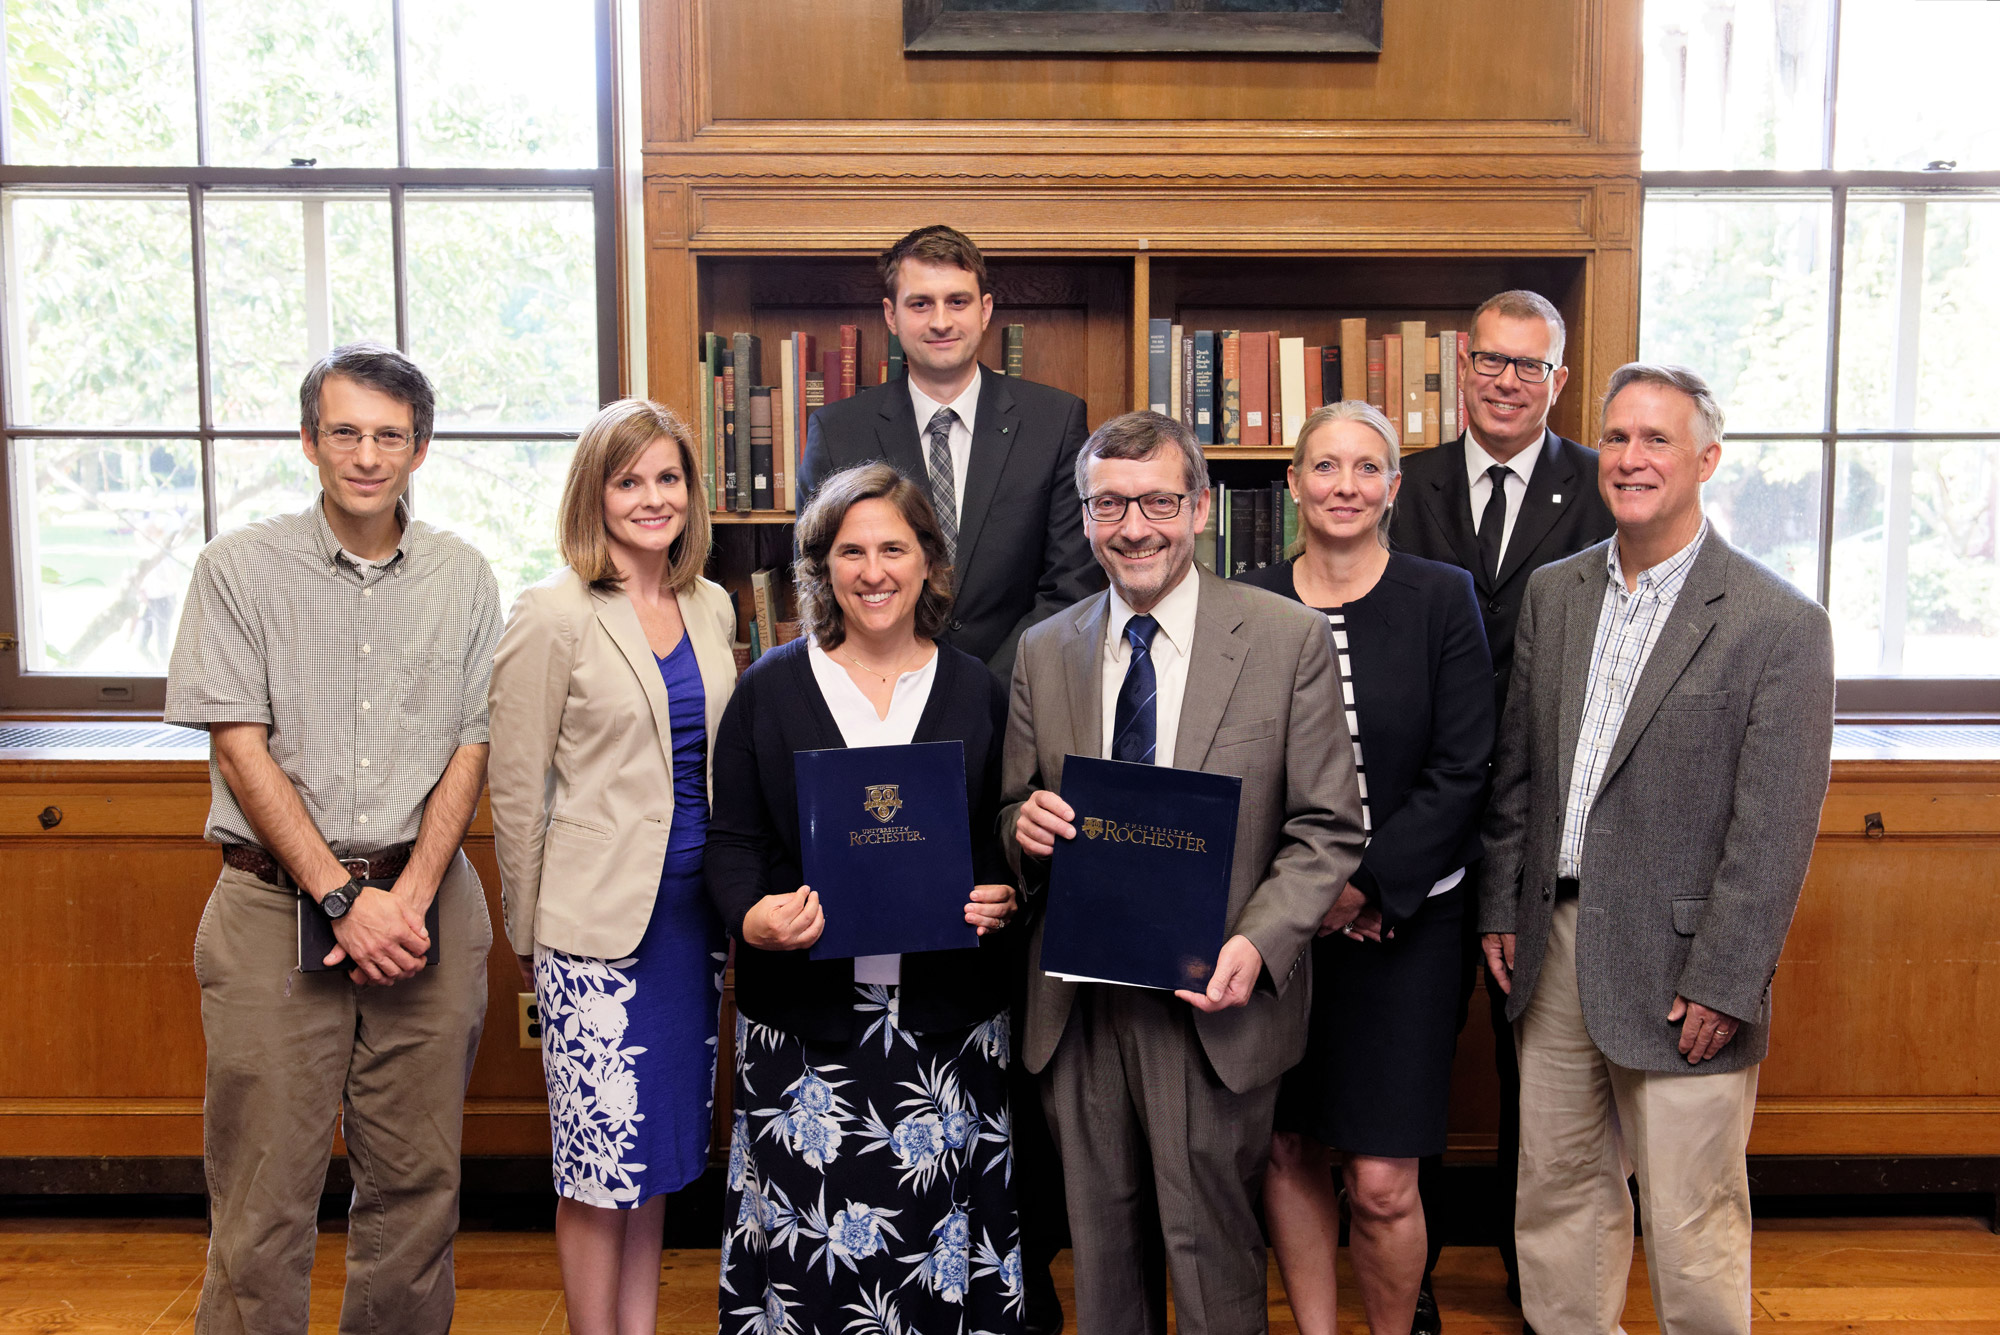 The University of Rochester and Friedrich Schiller University Jen sign a Memorandum of Understanding for the ERASMUS program. The event was held in the Welles-Brown Room of Rush Rhees Library on the University of Rochester&#39;s River Campus, Rochester, NY, Monday, September 12, 2016. In the front row from left to right: Andrew Berger, Jane Gatewood, Wendi Heinzelman, Walter Rosenthal, Claudia Hillinger, and Tom Brown. In the rear from left to right: Kevin Füchsel and Andreas Tünnermann. 